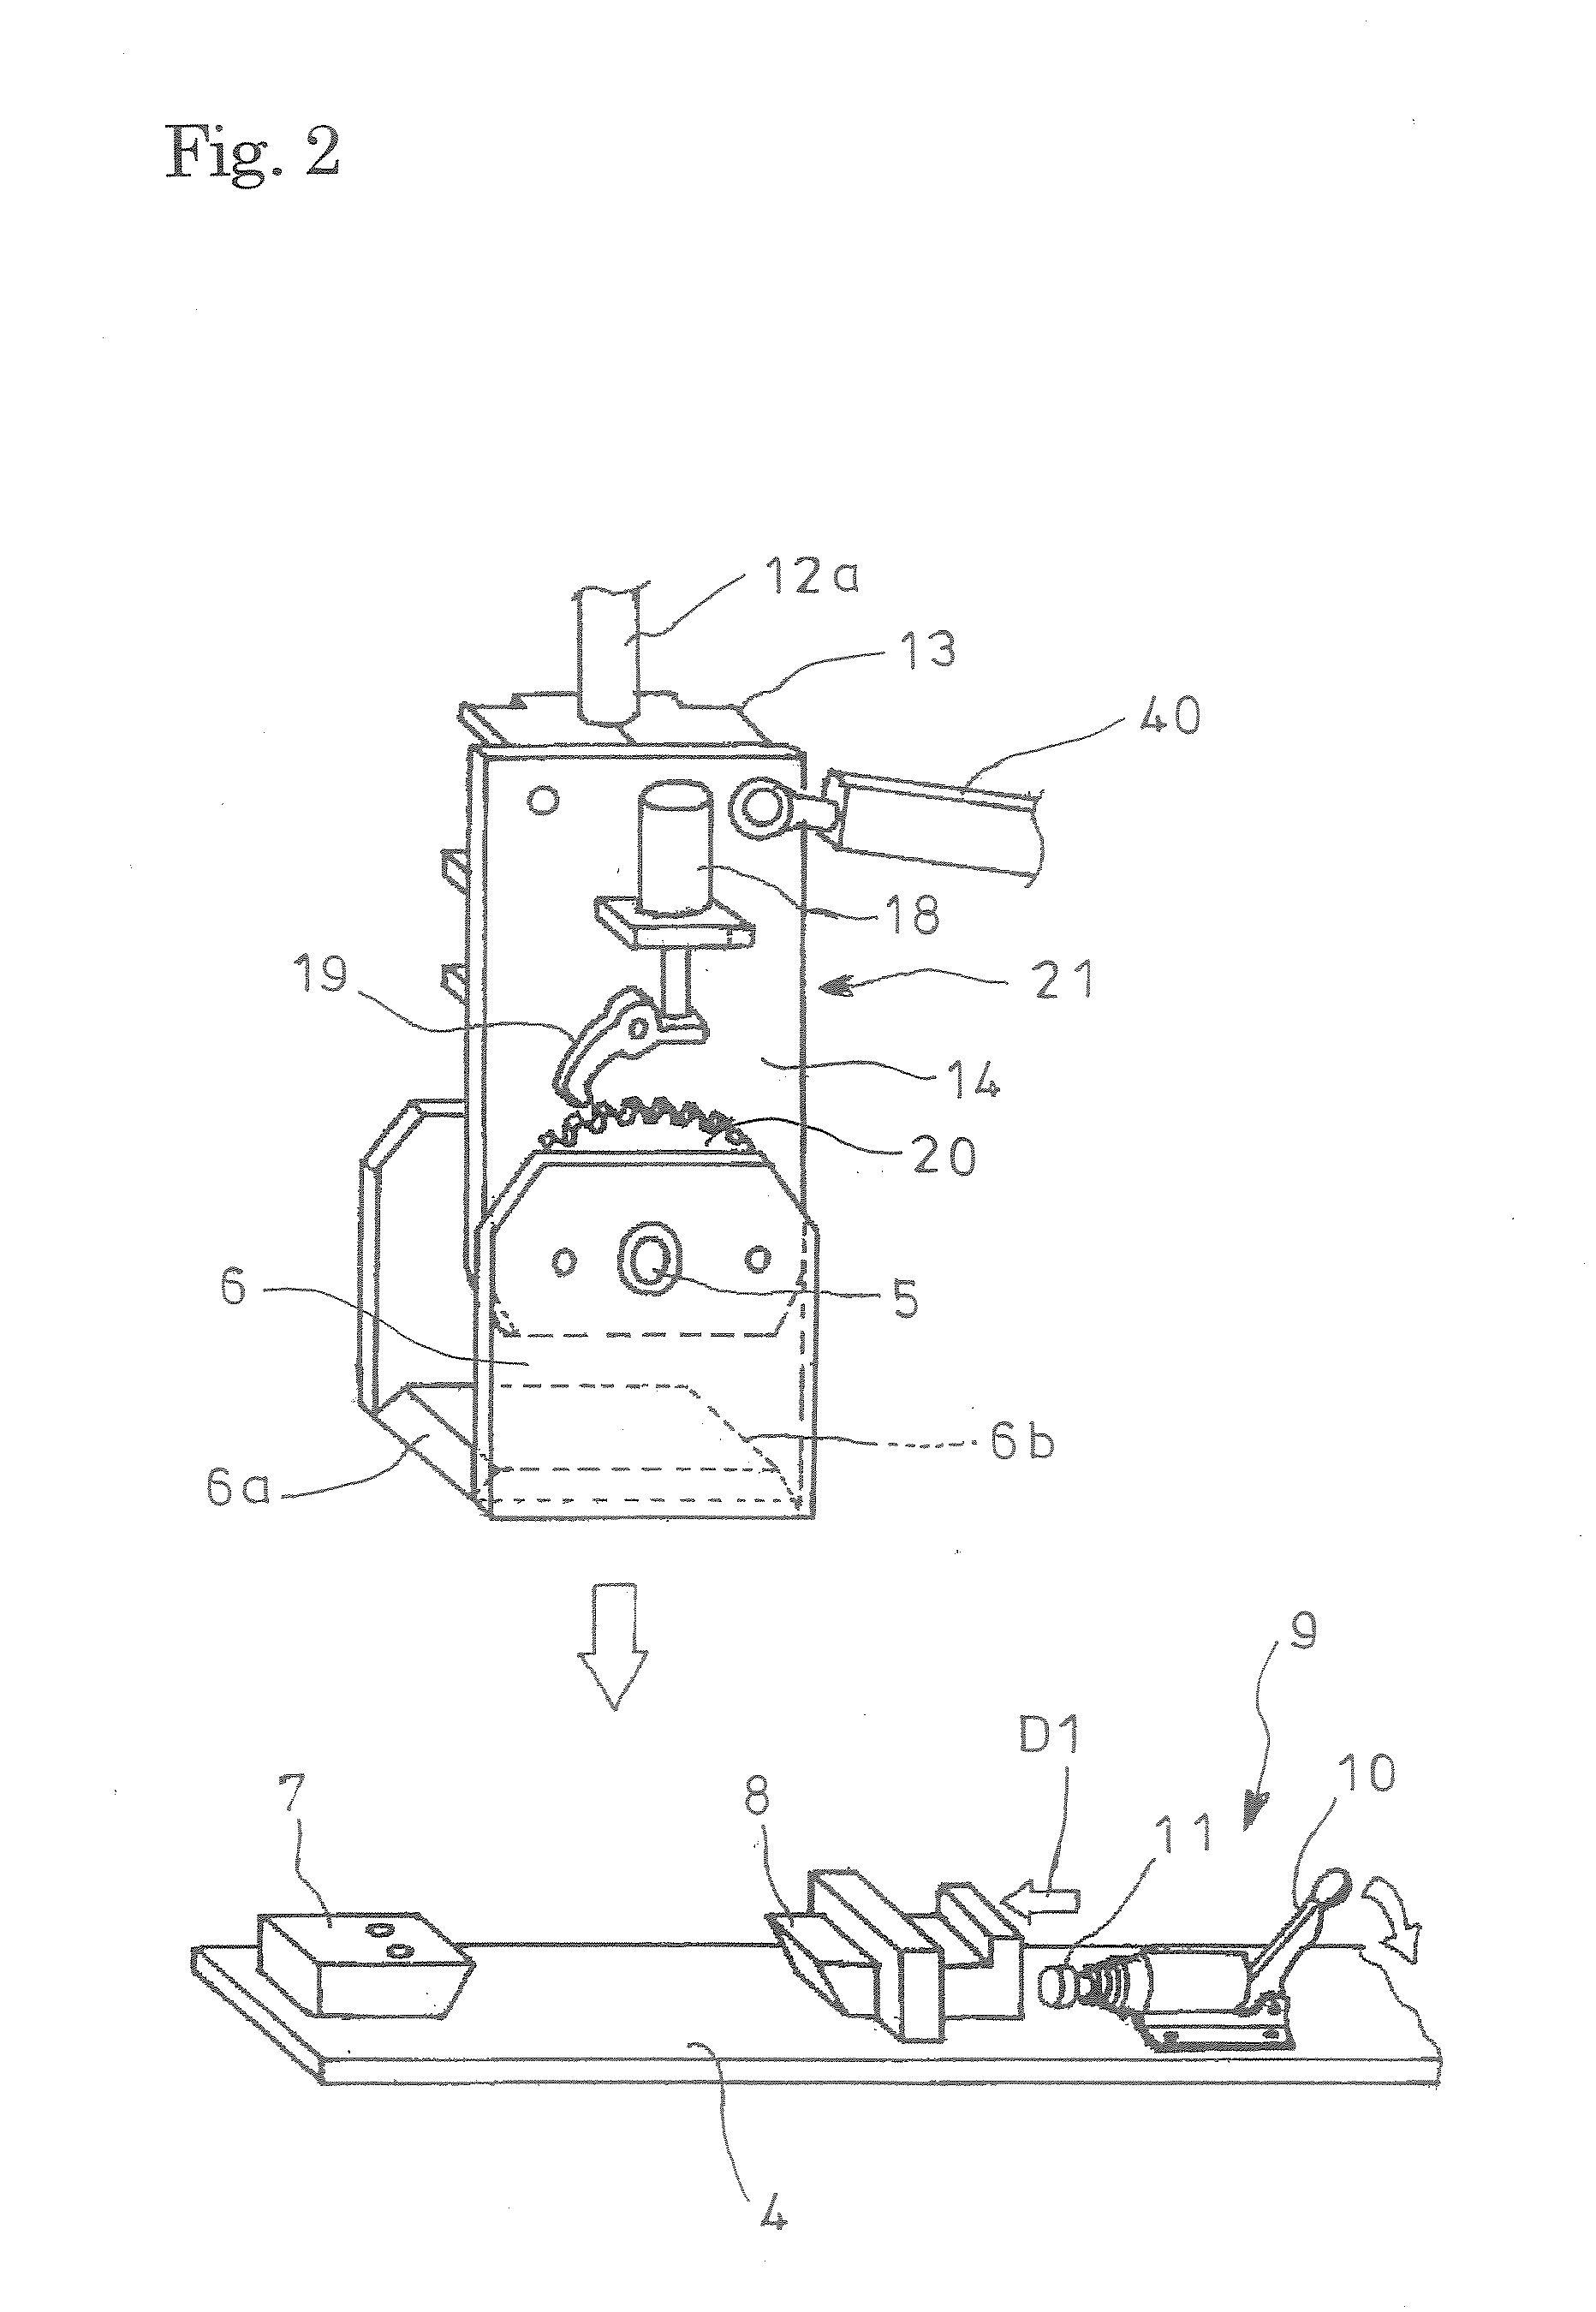 Drive Assistant Device for Automobile